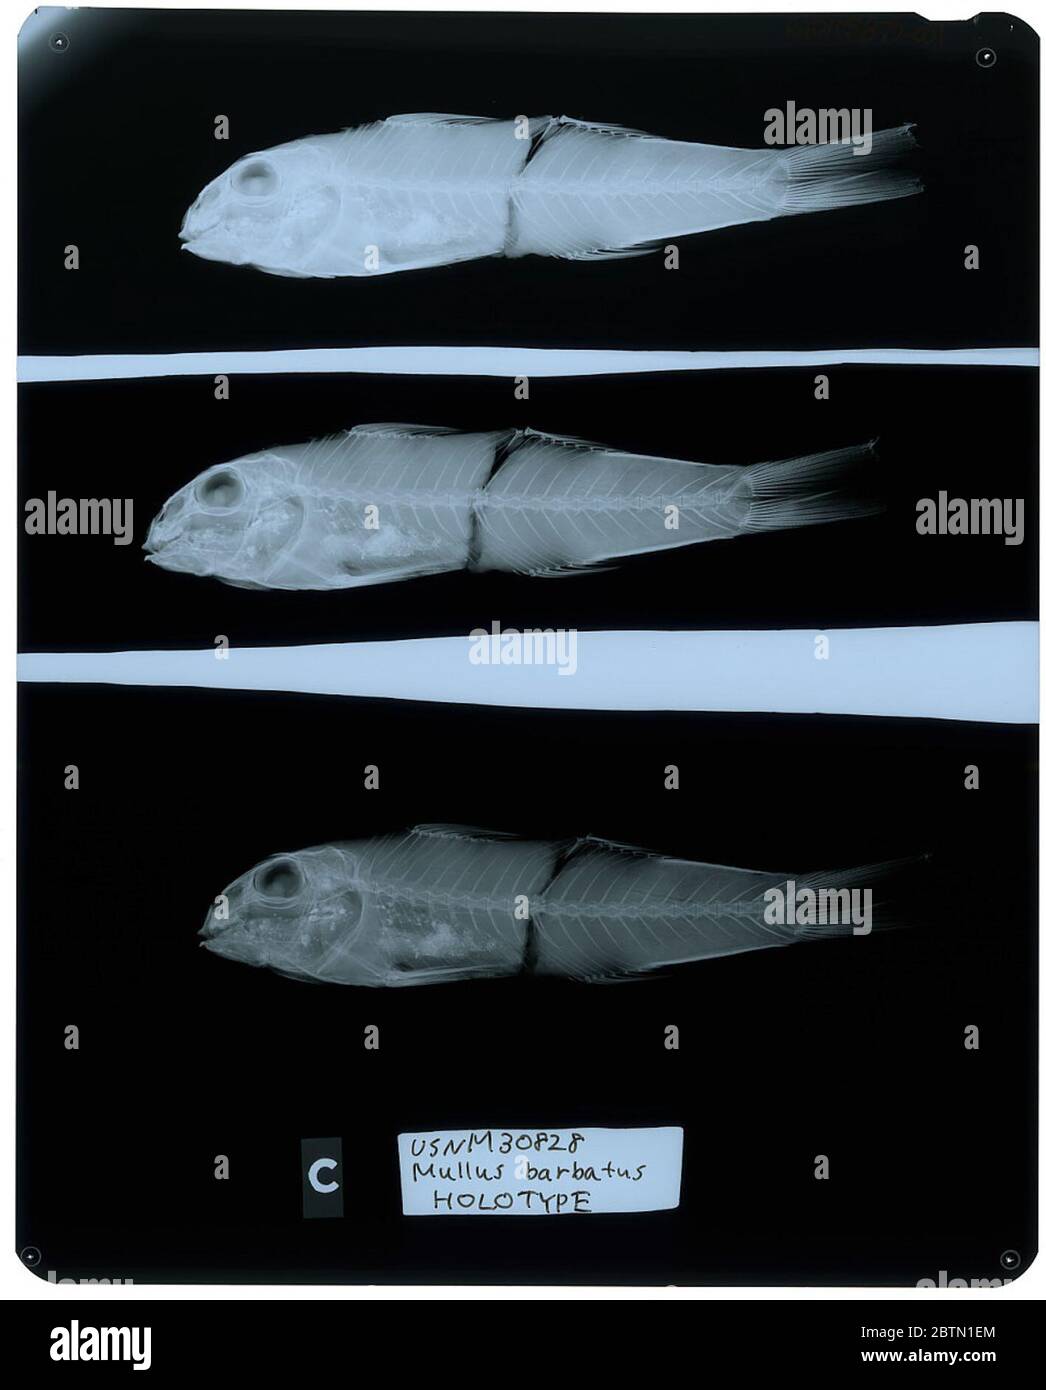 Mullus barbatus auratus. Radiograph is of a type; The Smithsonian NMNH Division of Fishes uses the convention of maintaining the original species name for type specimens designated at the time of description. The currently accepted name for this species is Mullus auratus.26 Oct 20182 Stock Photo